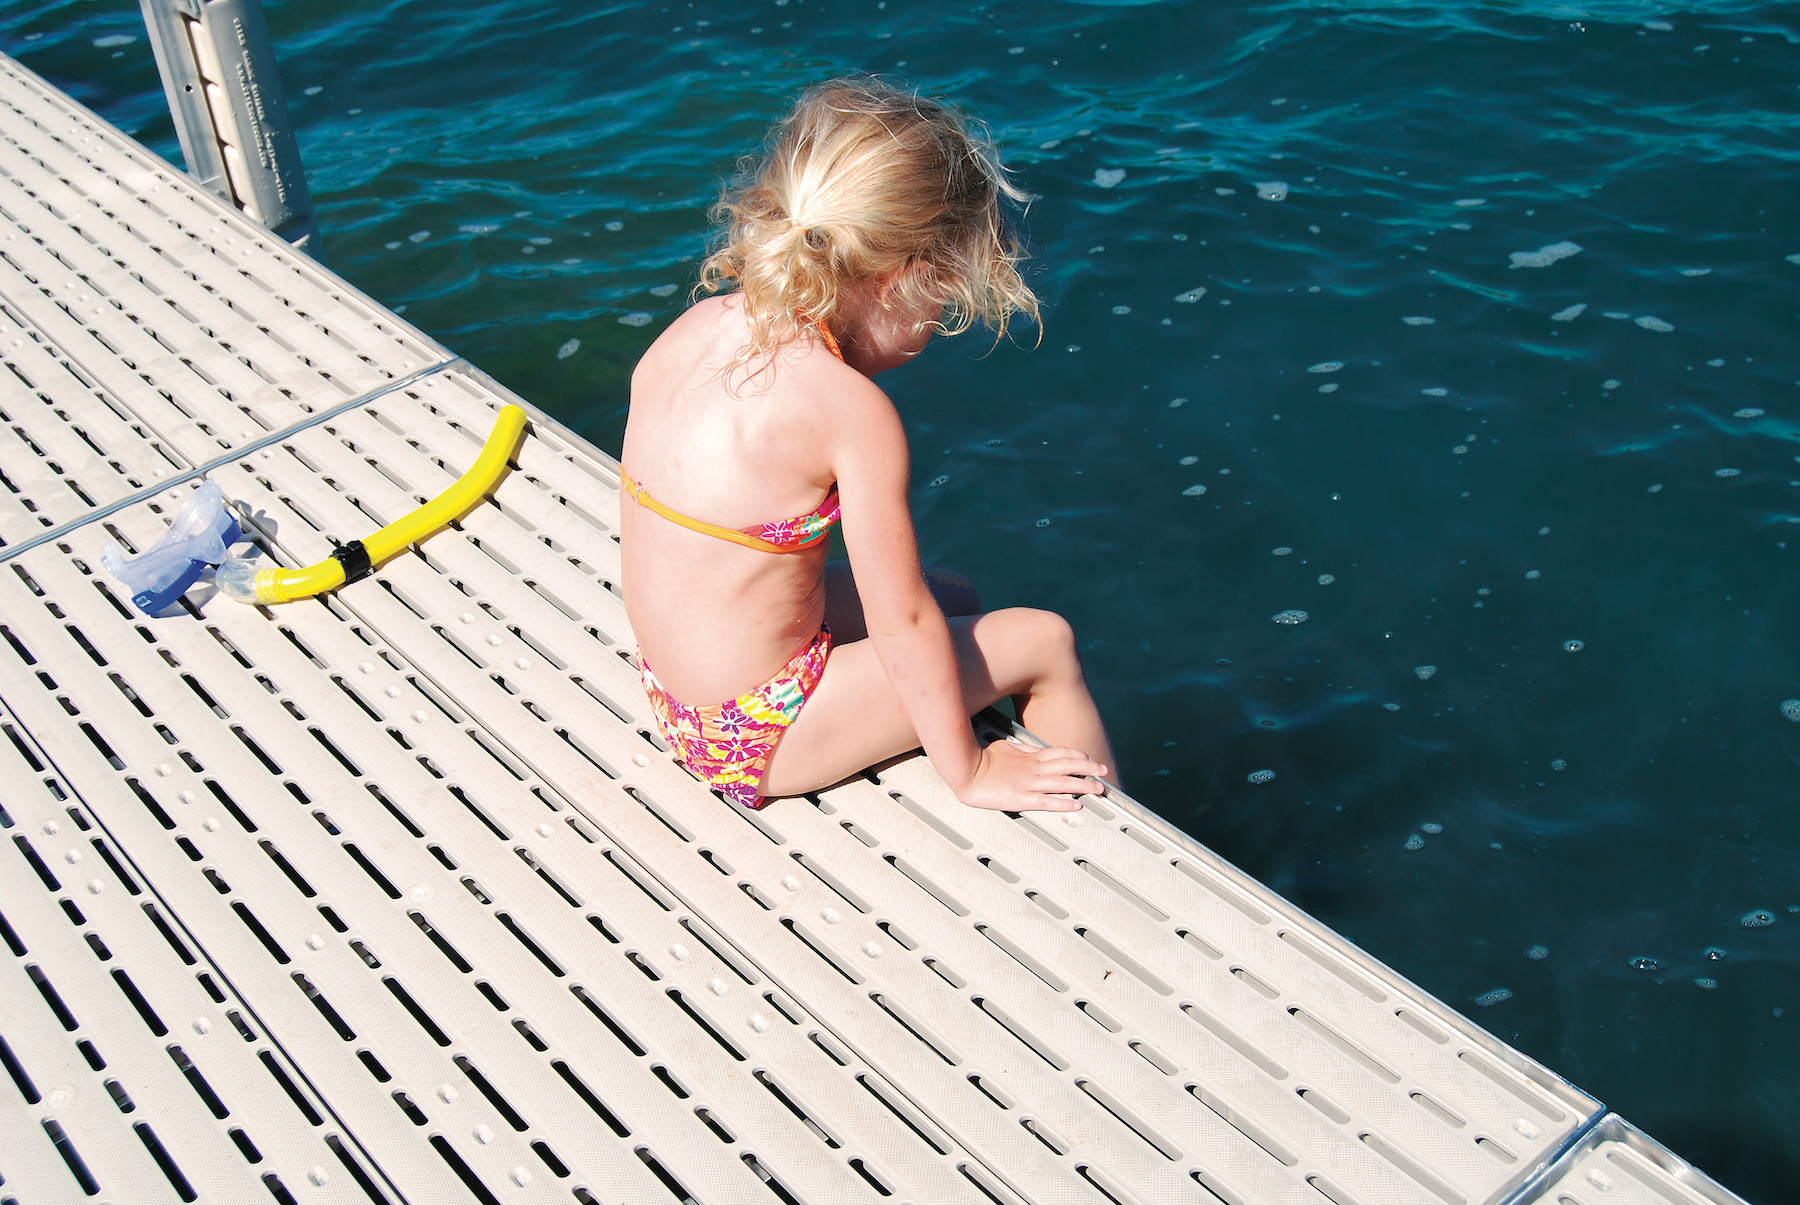 A young girl sitting at the edge of a dock looking into the blue water.